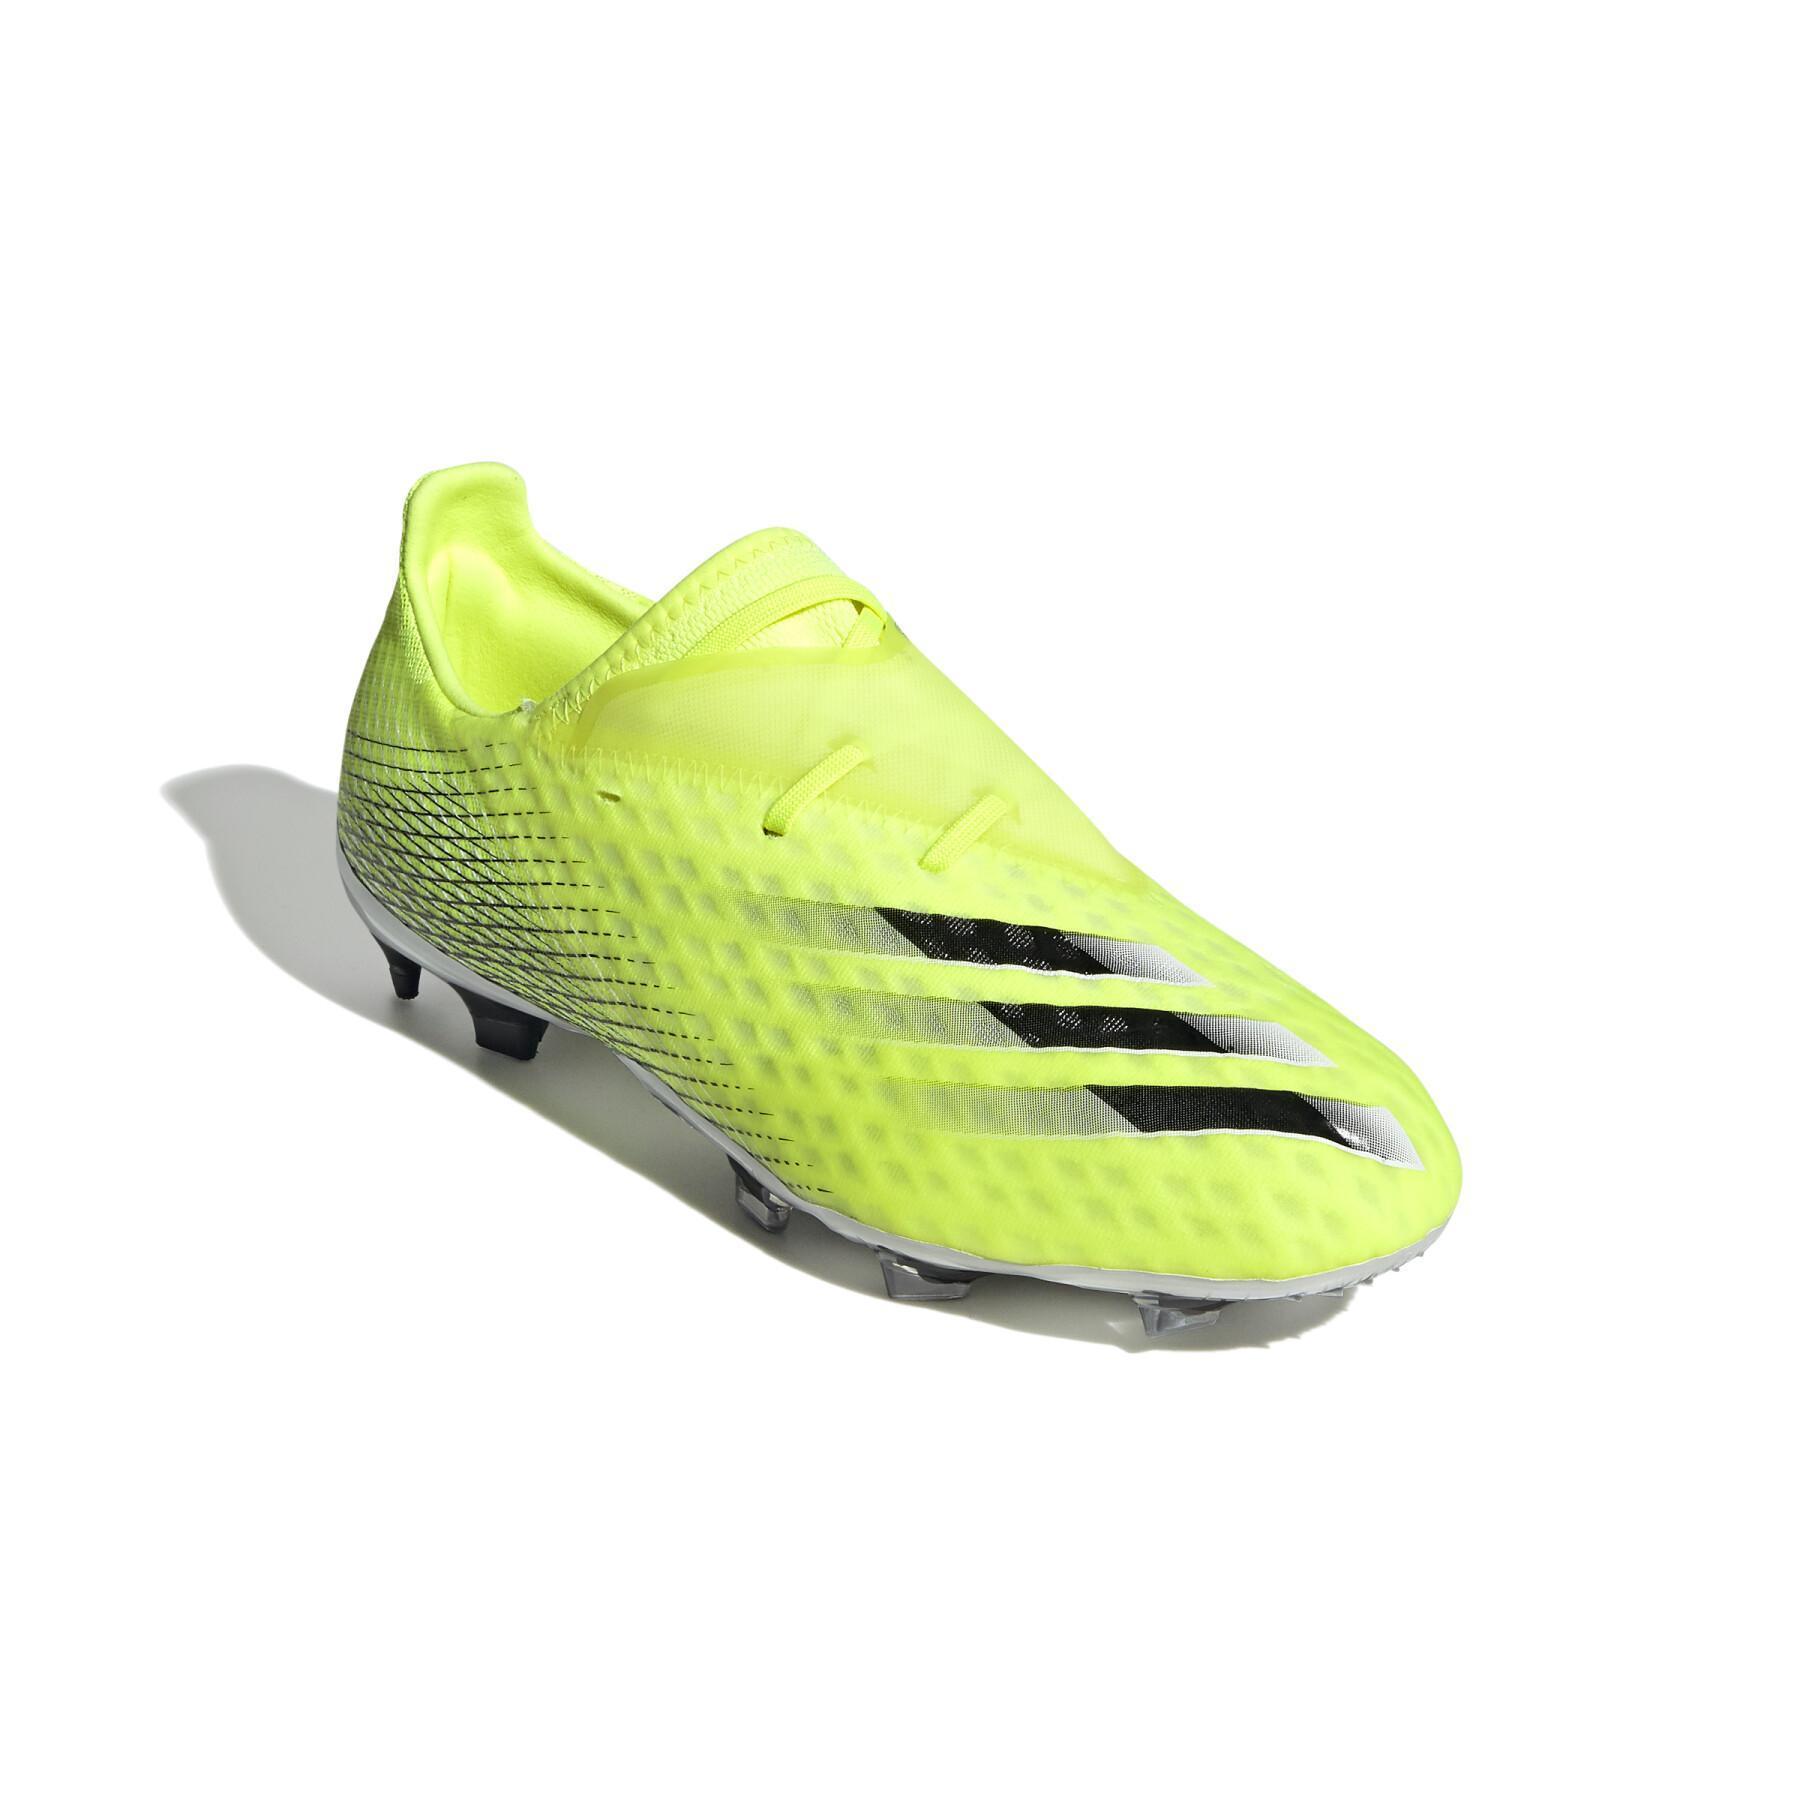 Chaussures de football adidas X Ghosted.2 FG